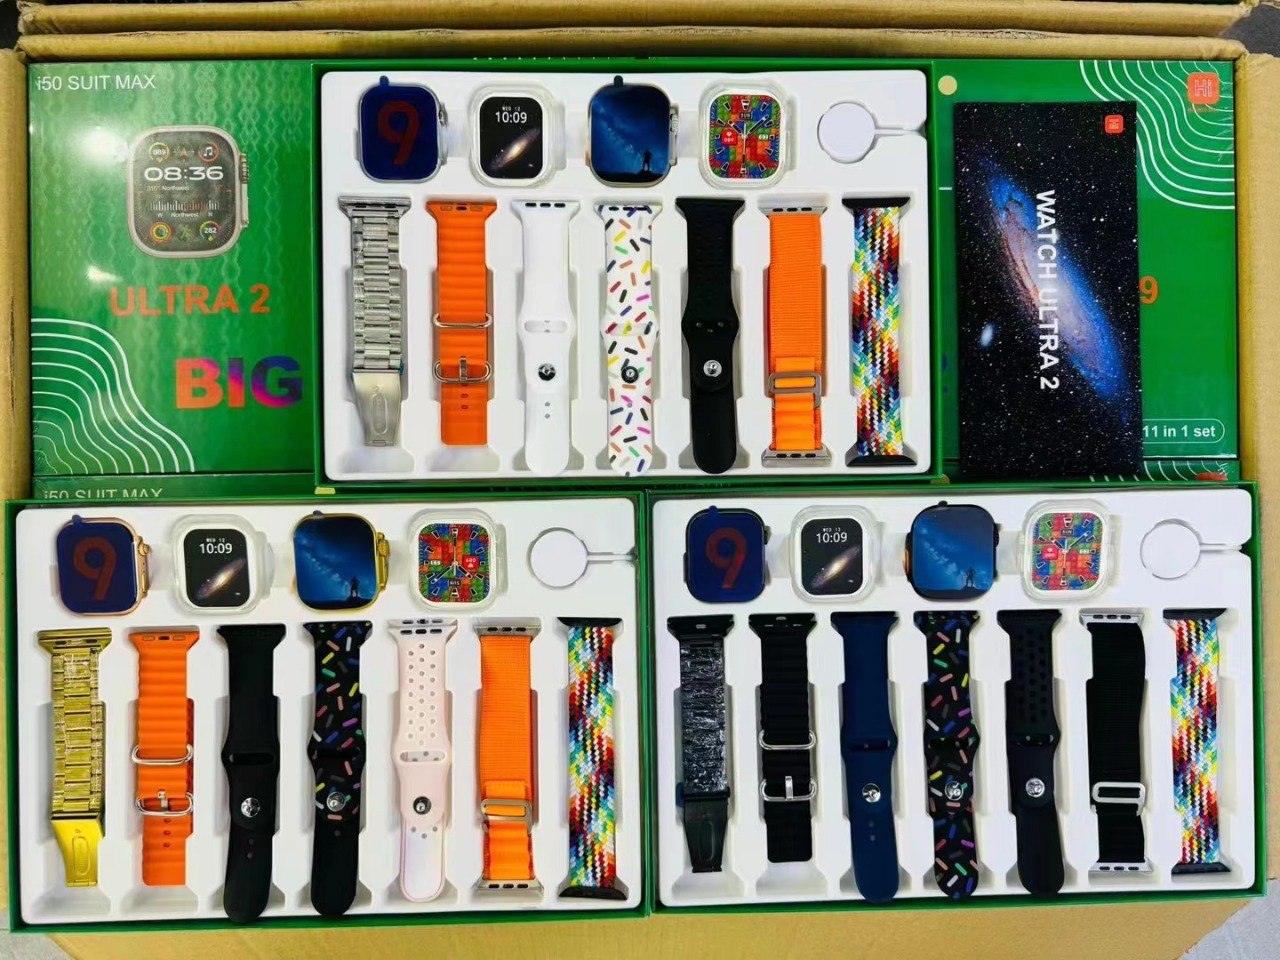 I50 Suit Max Ultra2 & Watch9 Dual Smart Watches - Basra Mobile Center